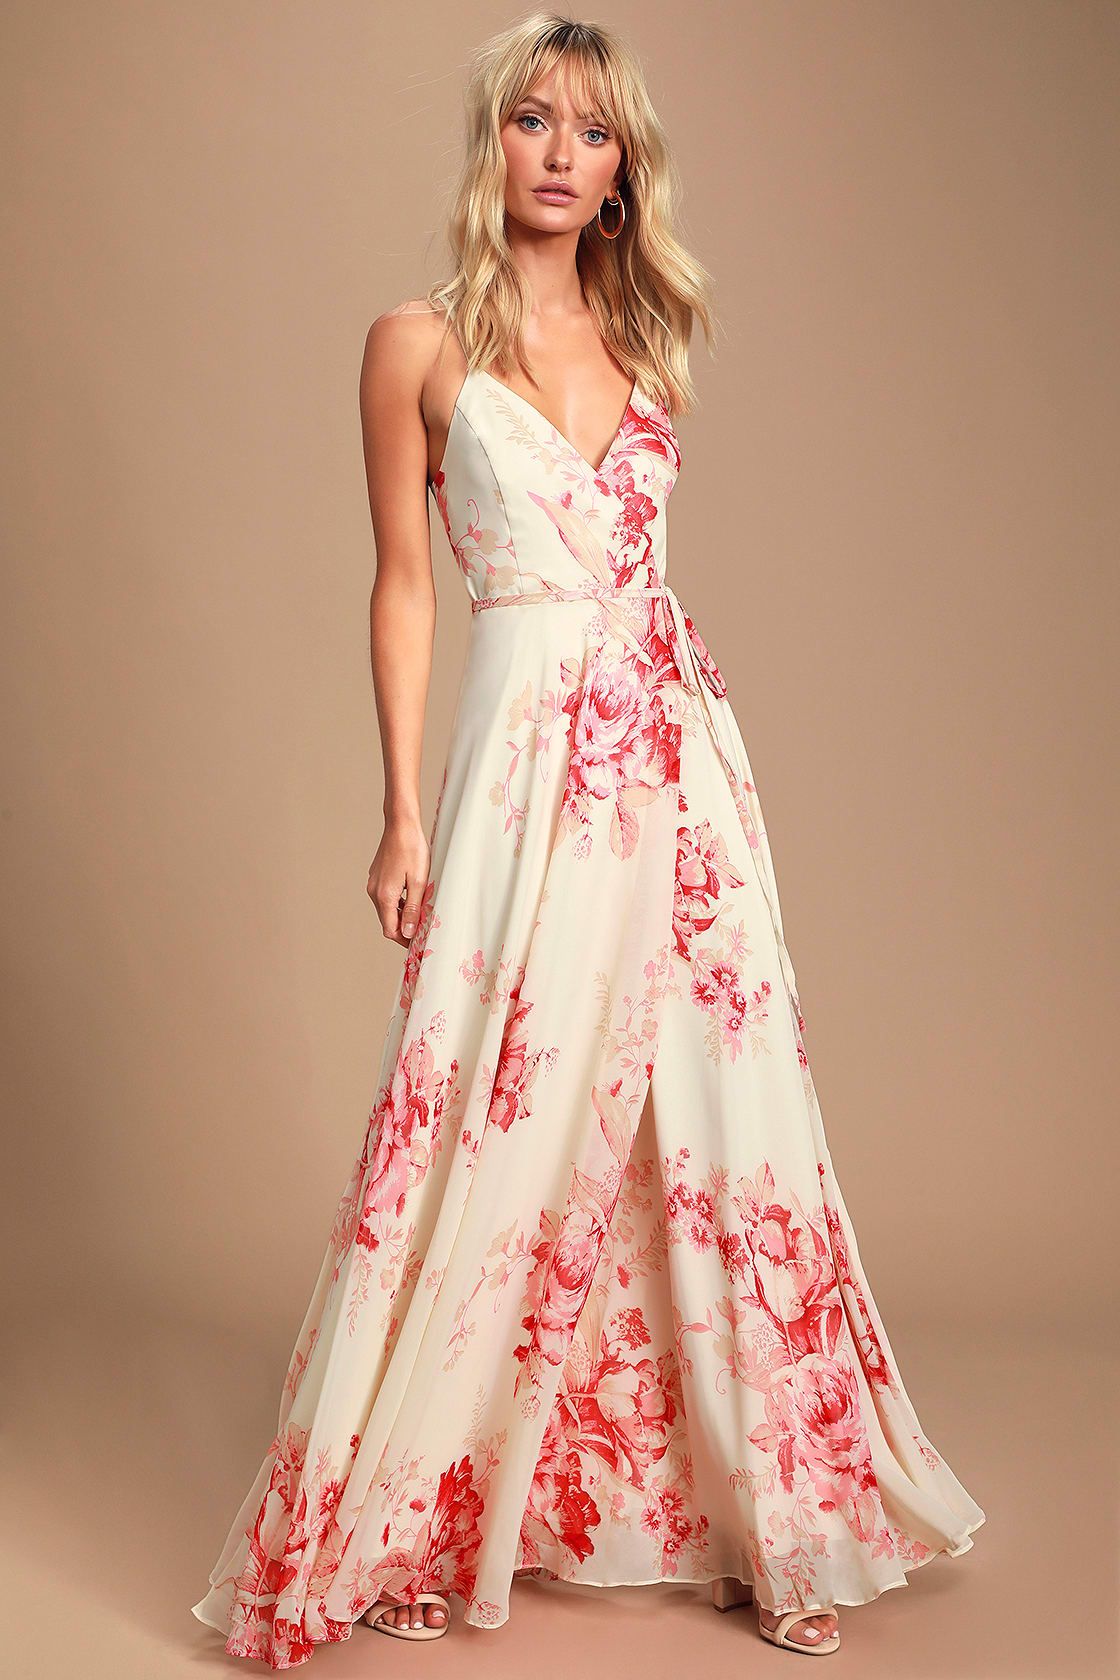 Elegantly Inclined Cream and Coral Floral Print Wrap Maxi Dress | Lulus